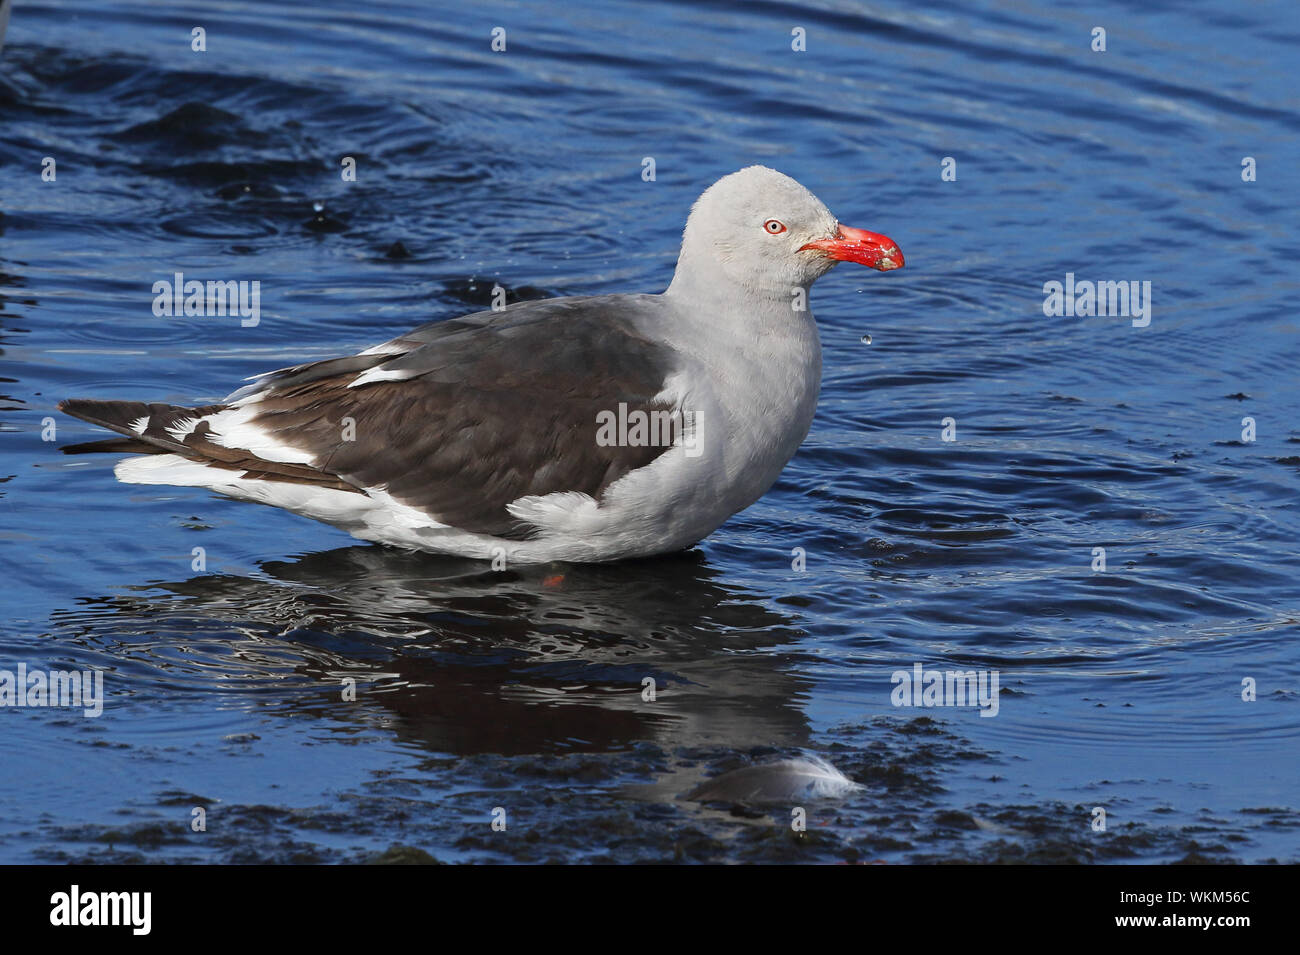 Dolphin Gull (Larus scoresbii) adult standing in shallow water bathing  Tierra del Fuego, Chile            January Stock Photo